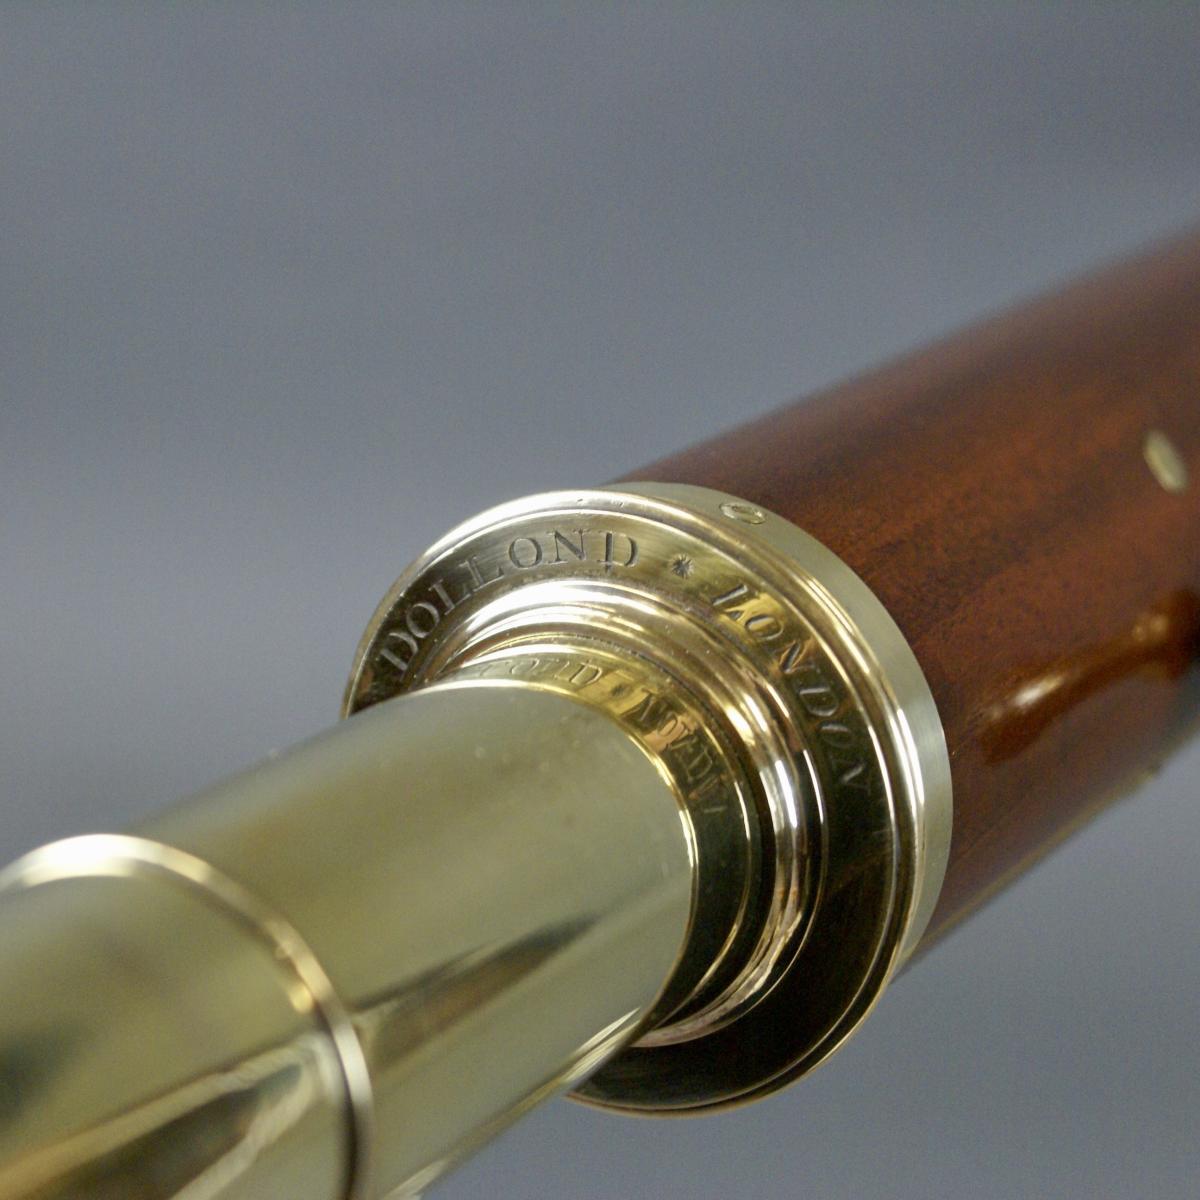 A library telescope by Dolland London